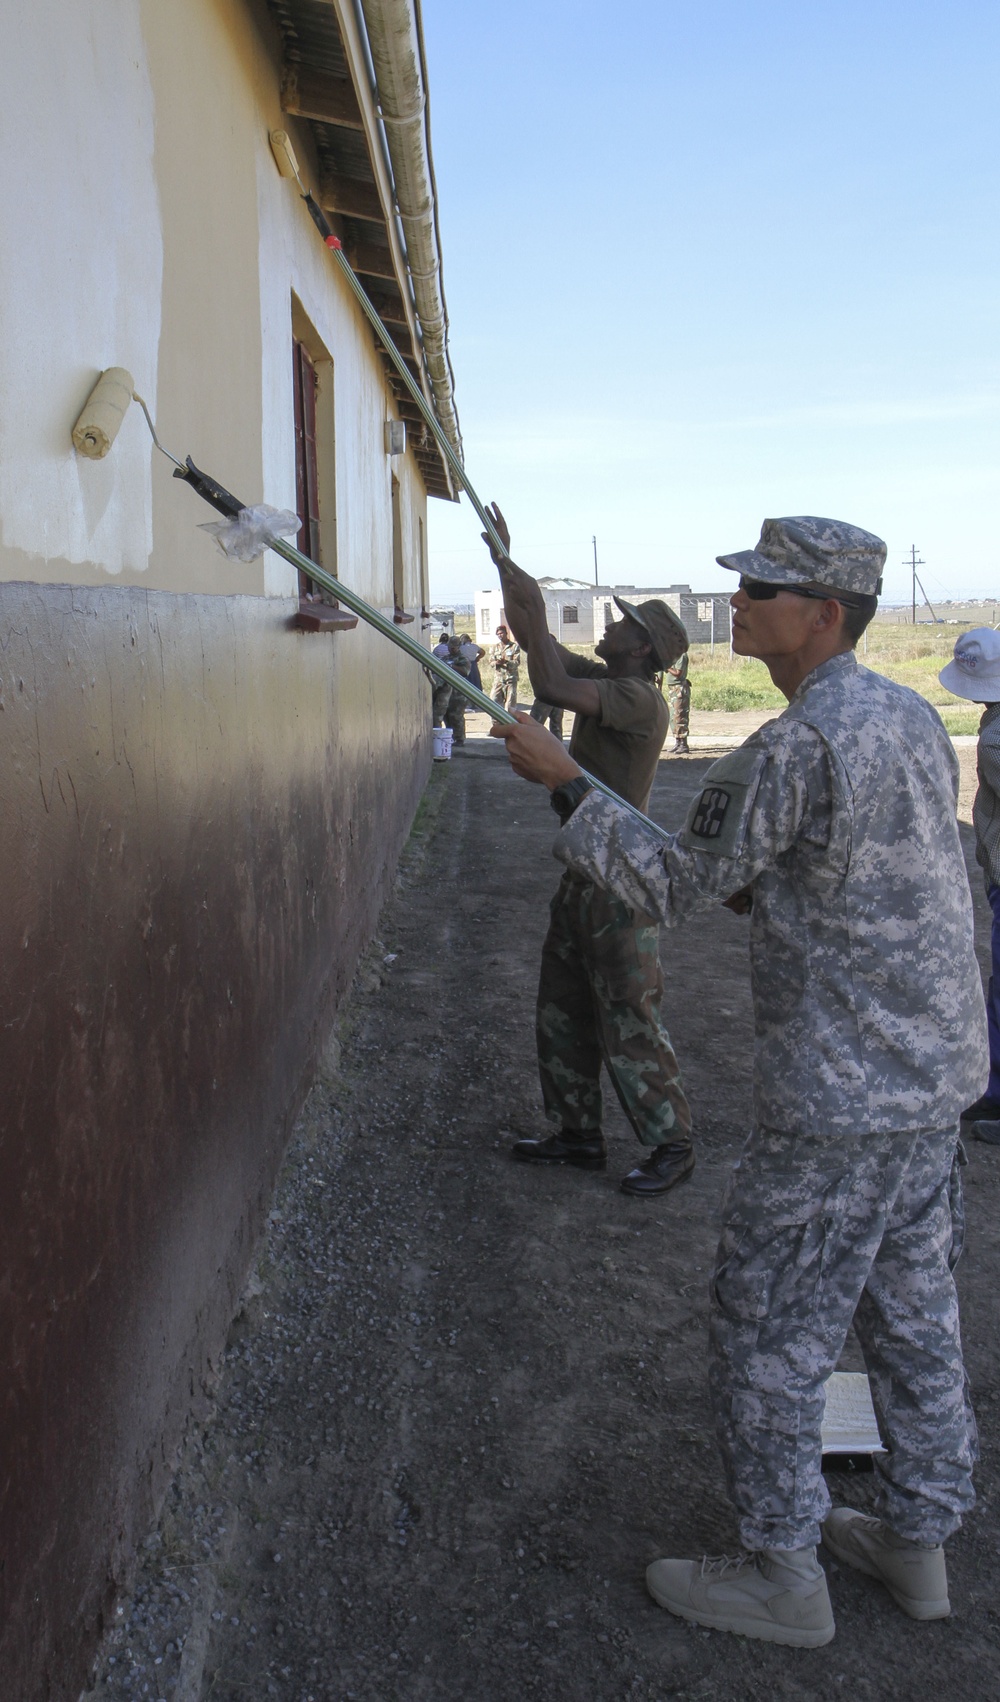 US and South African military members volunteer at local school